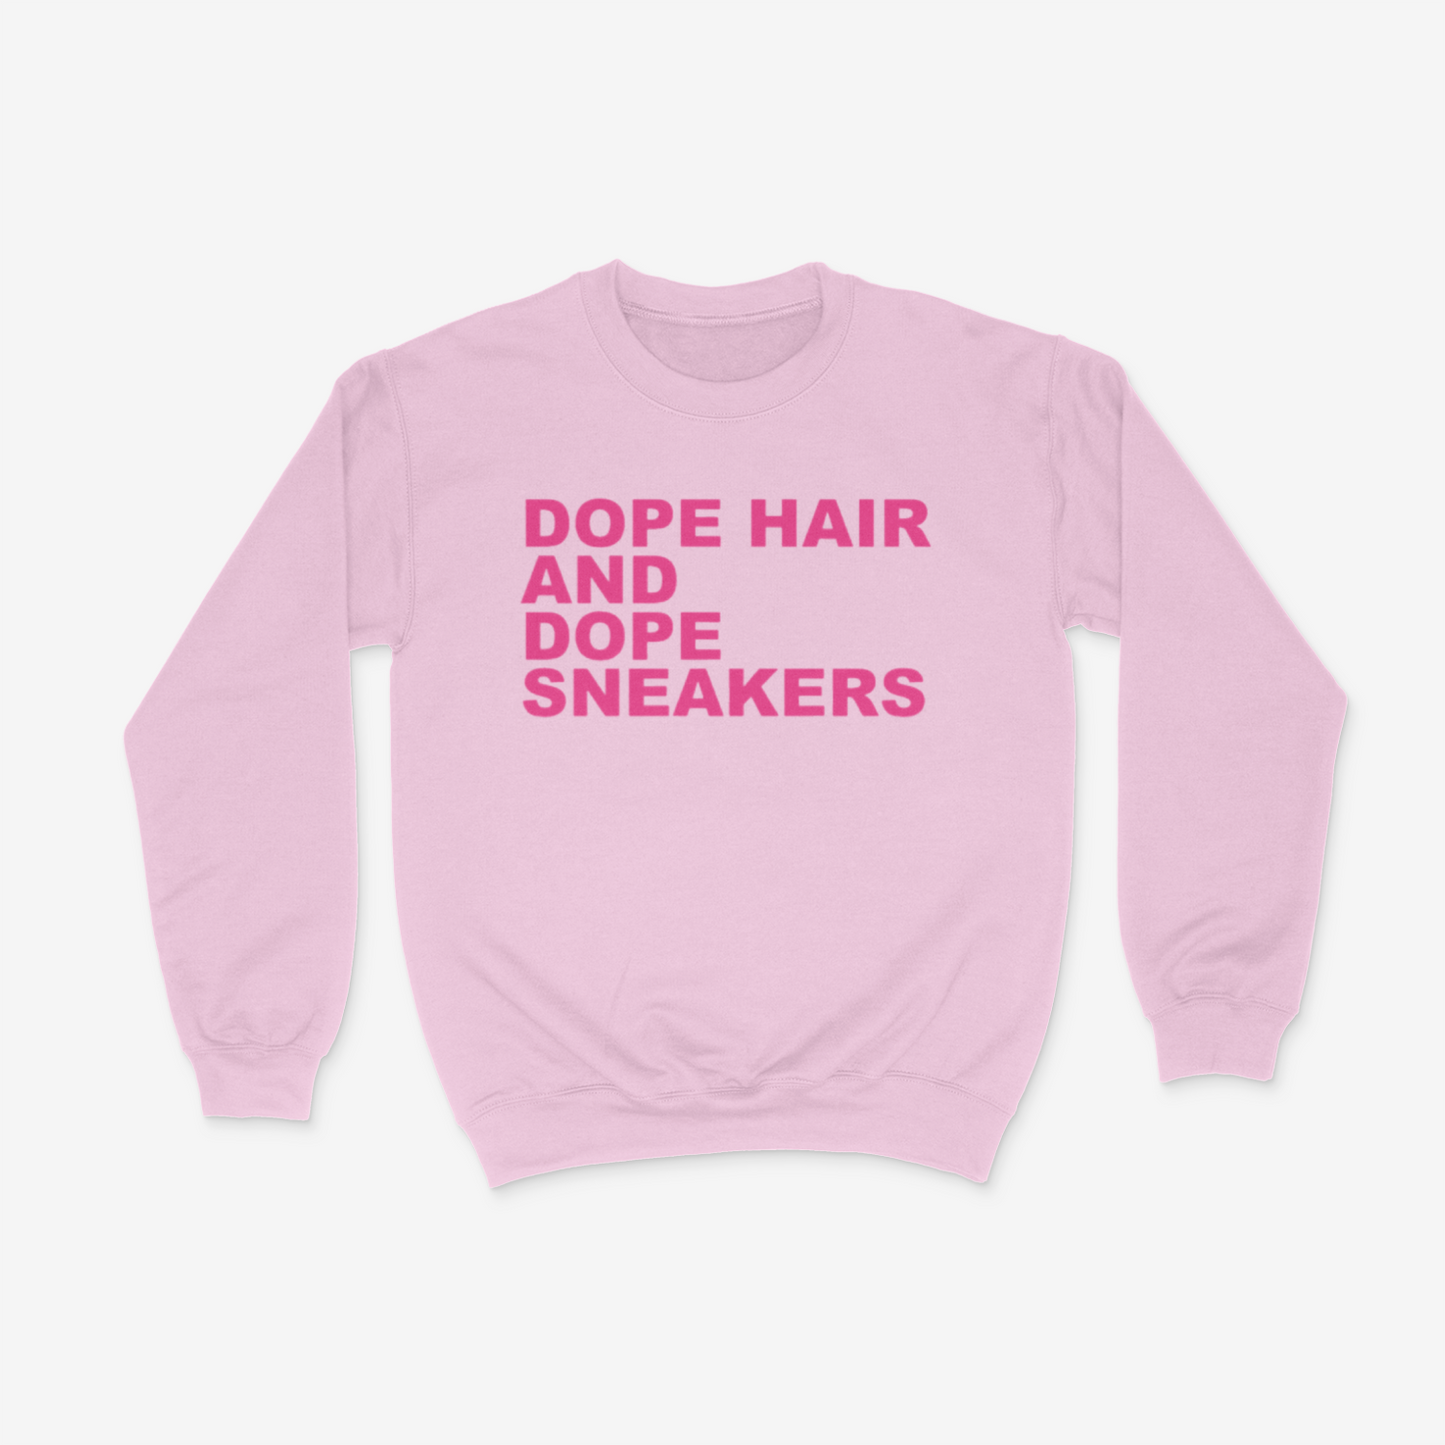 Dope Hair and Dope Sneakers Crewneck (Pink)